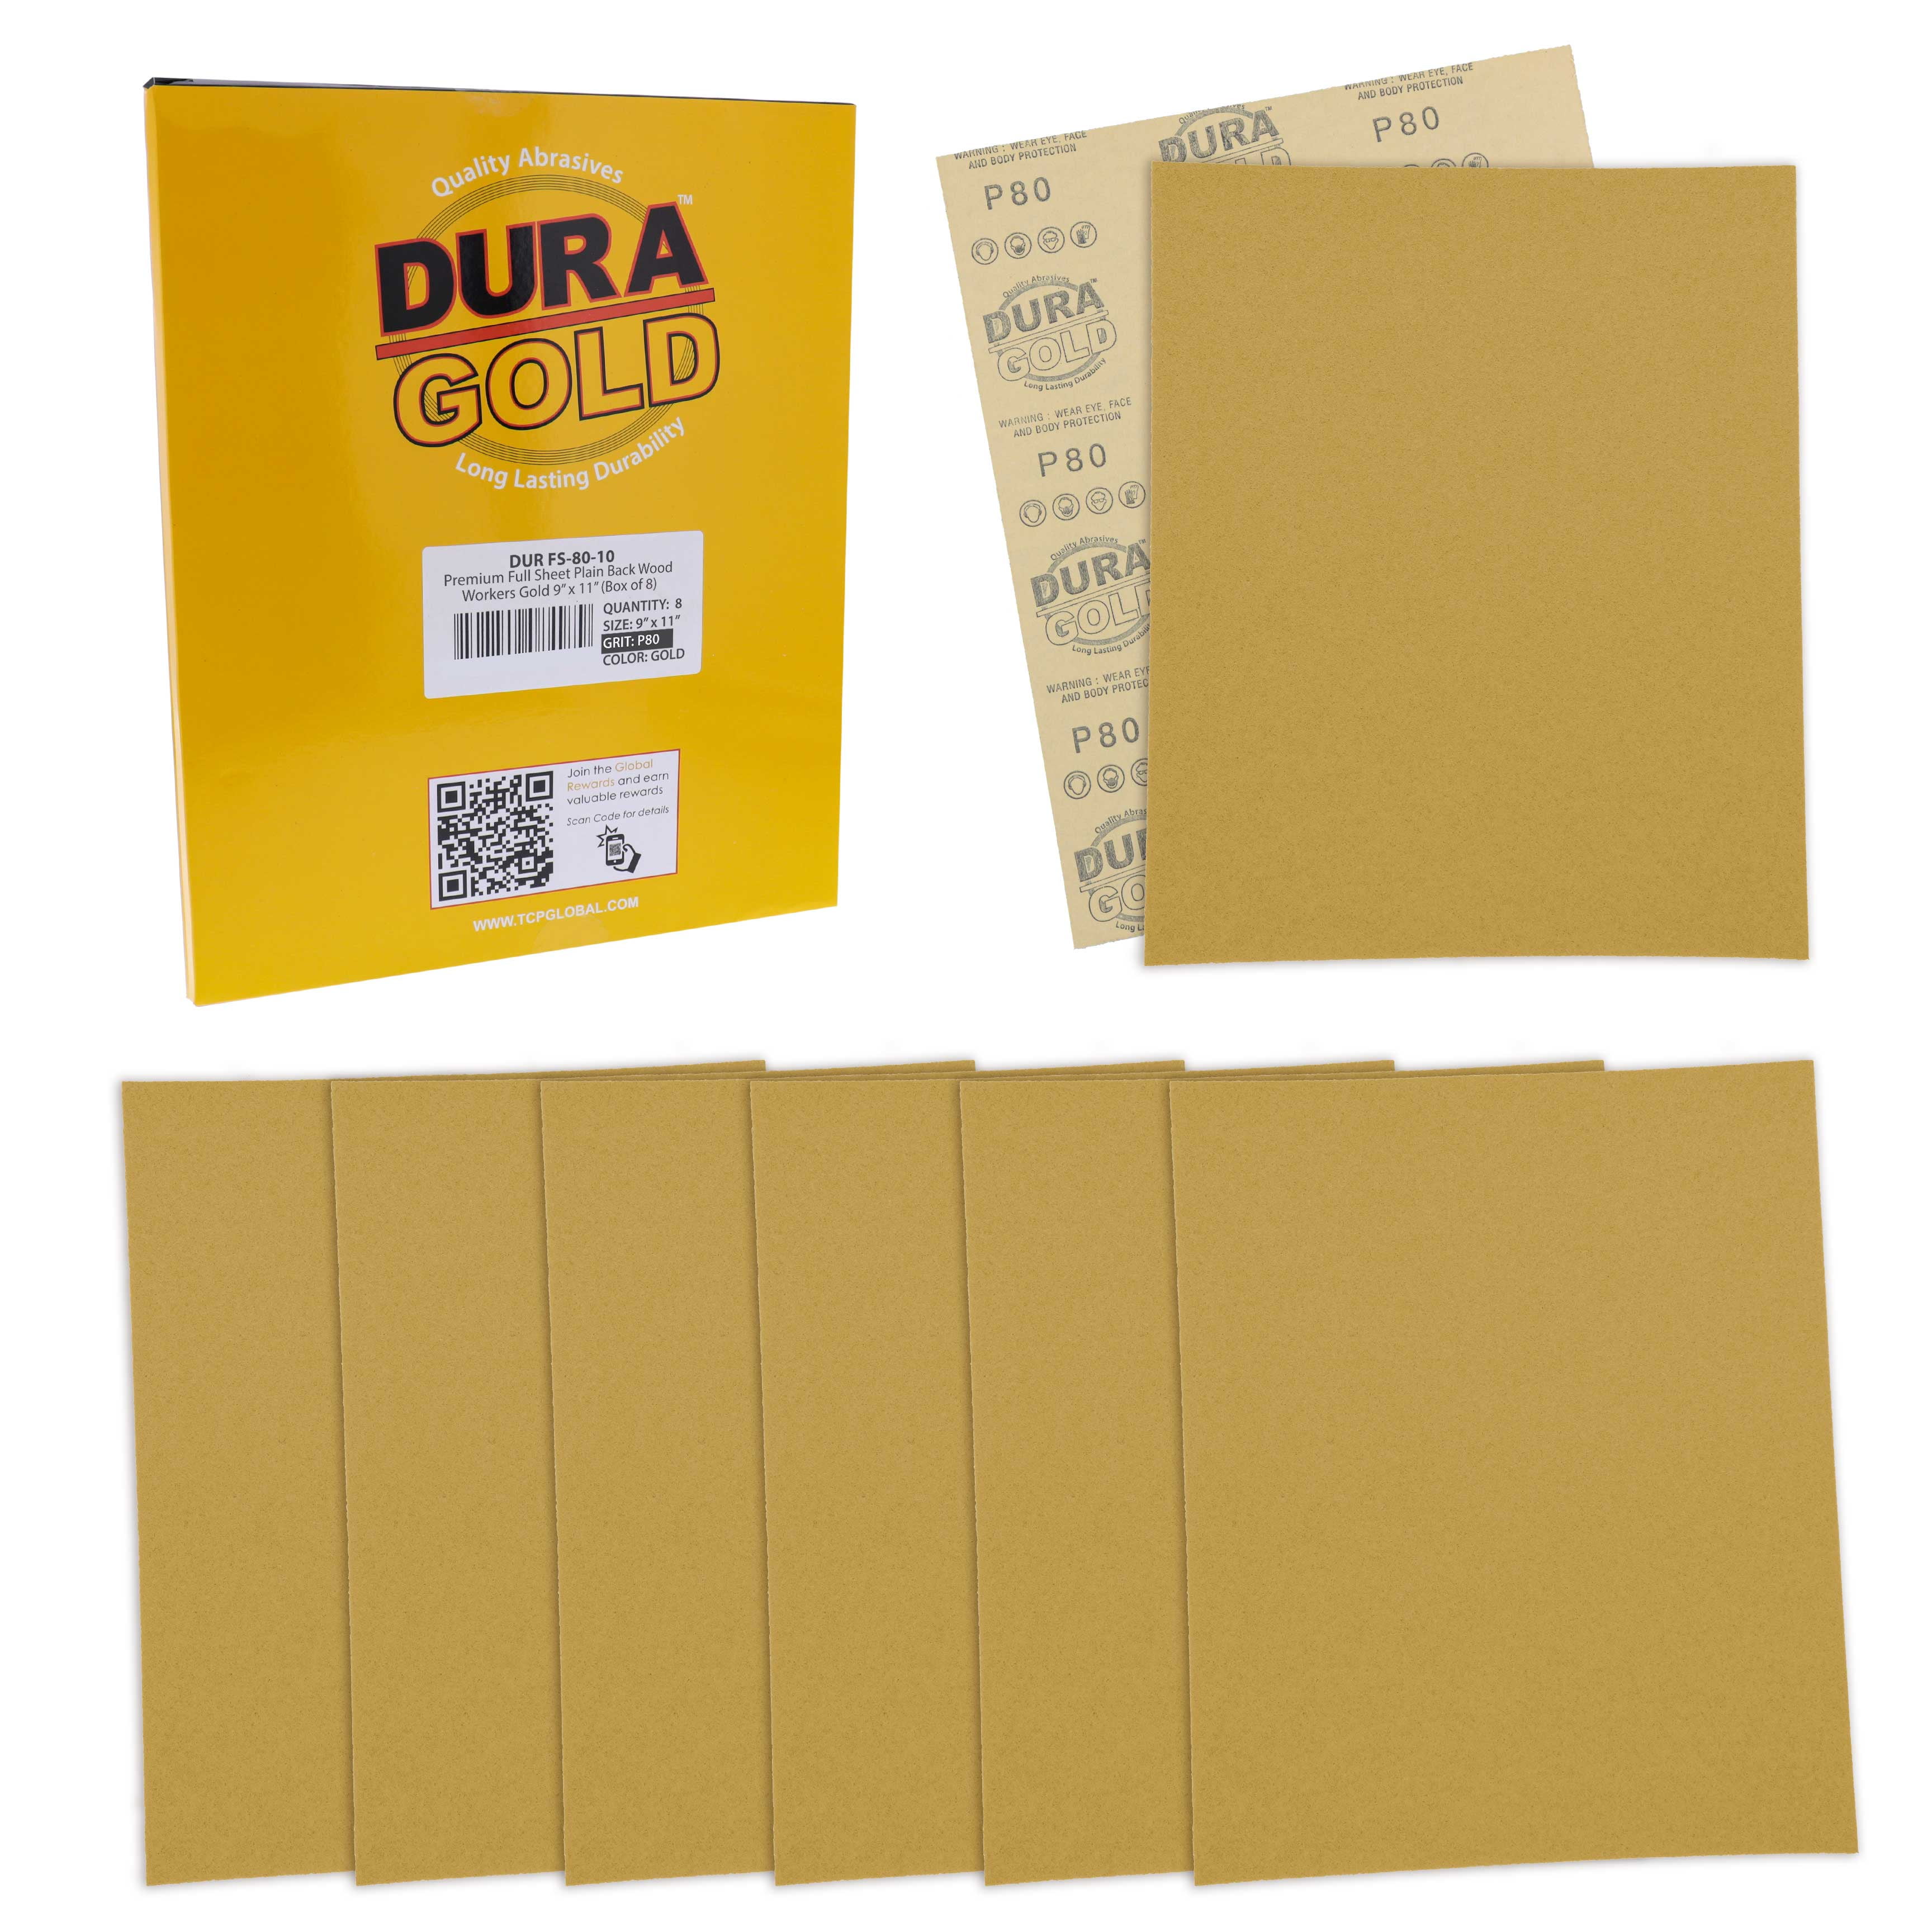 Professional cut to 5-1/2 x 9 Sheets 400 Grit Premium Wet or Dry Color Sanding and Polishing for Automotive and Woodworking Box of 25 Sandpaper Finishing Sheets Dura-Gold 